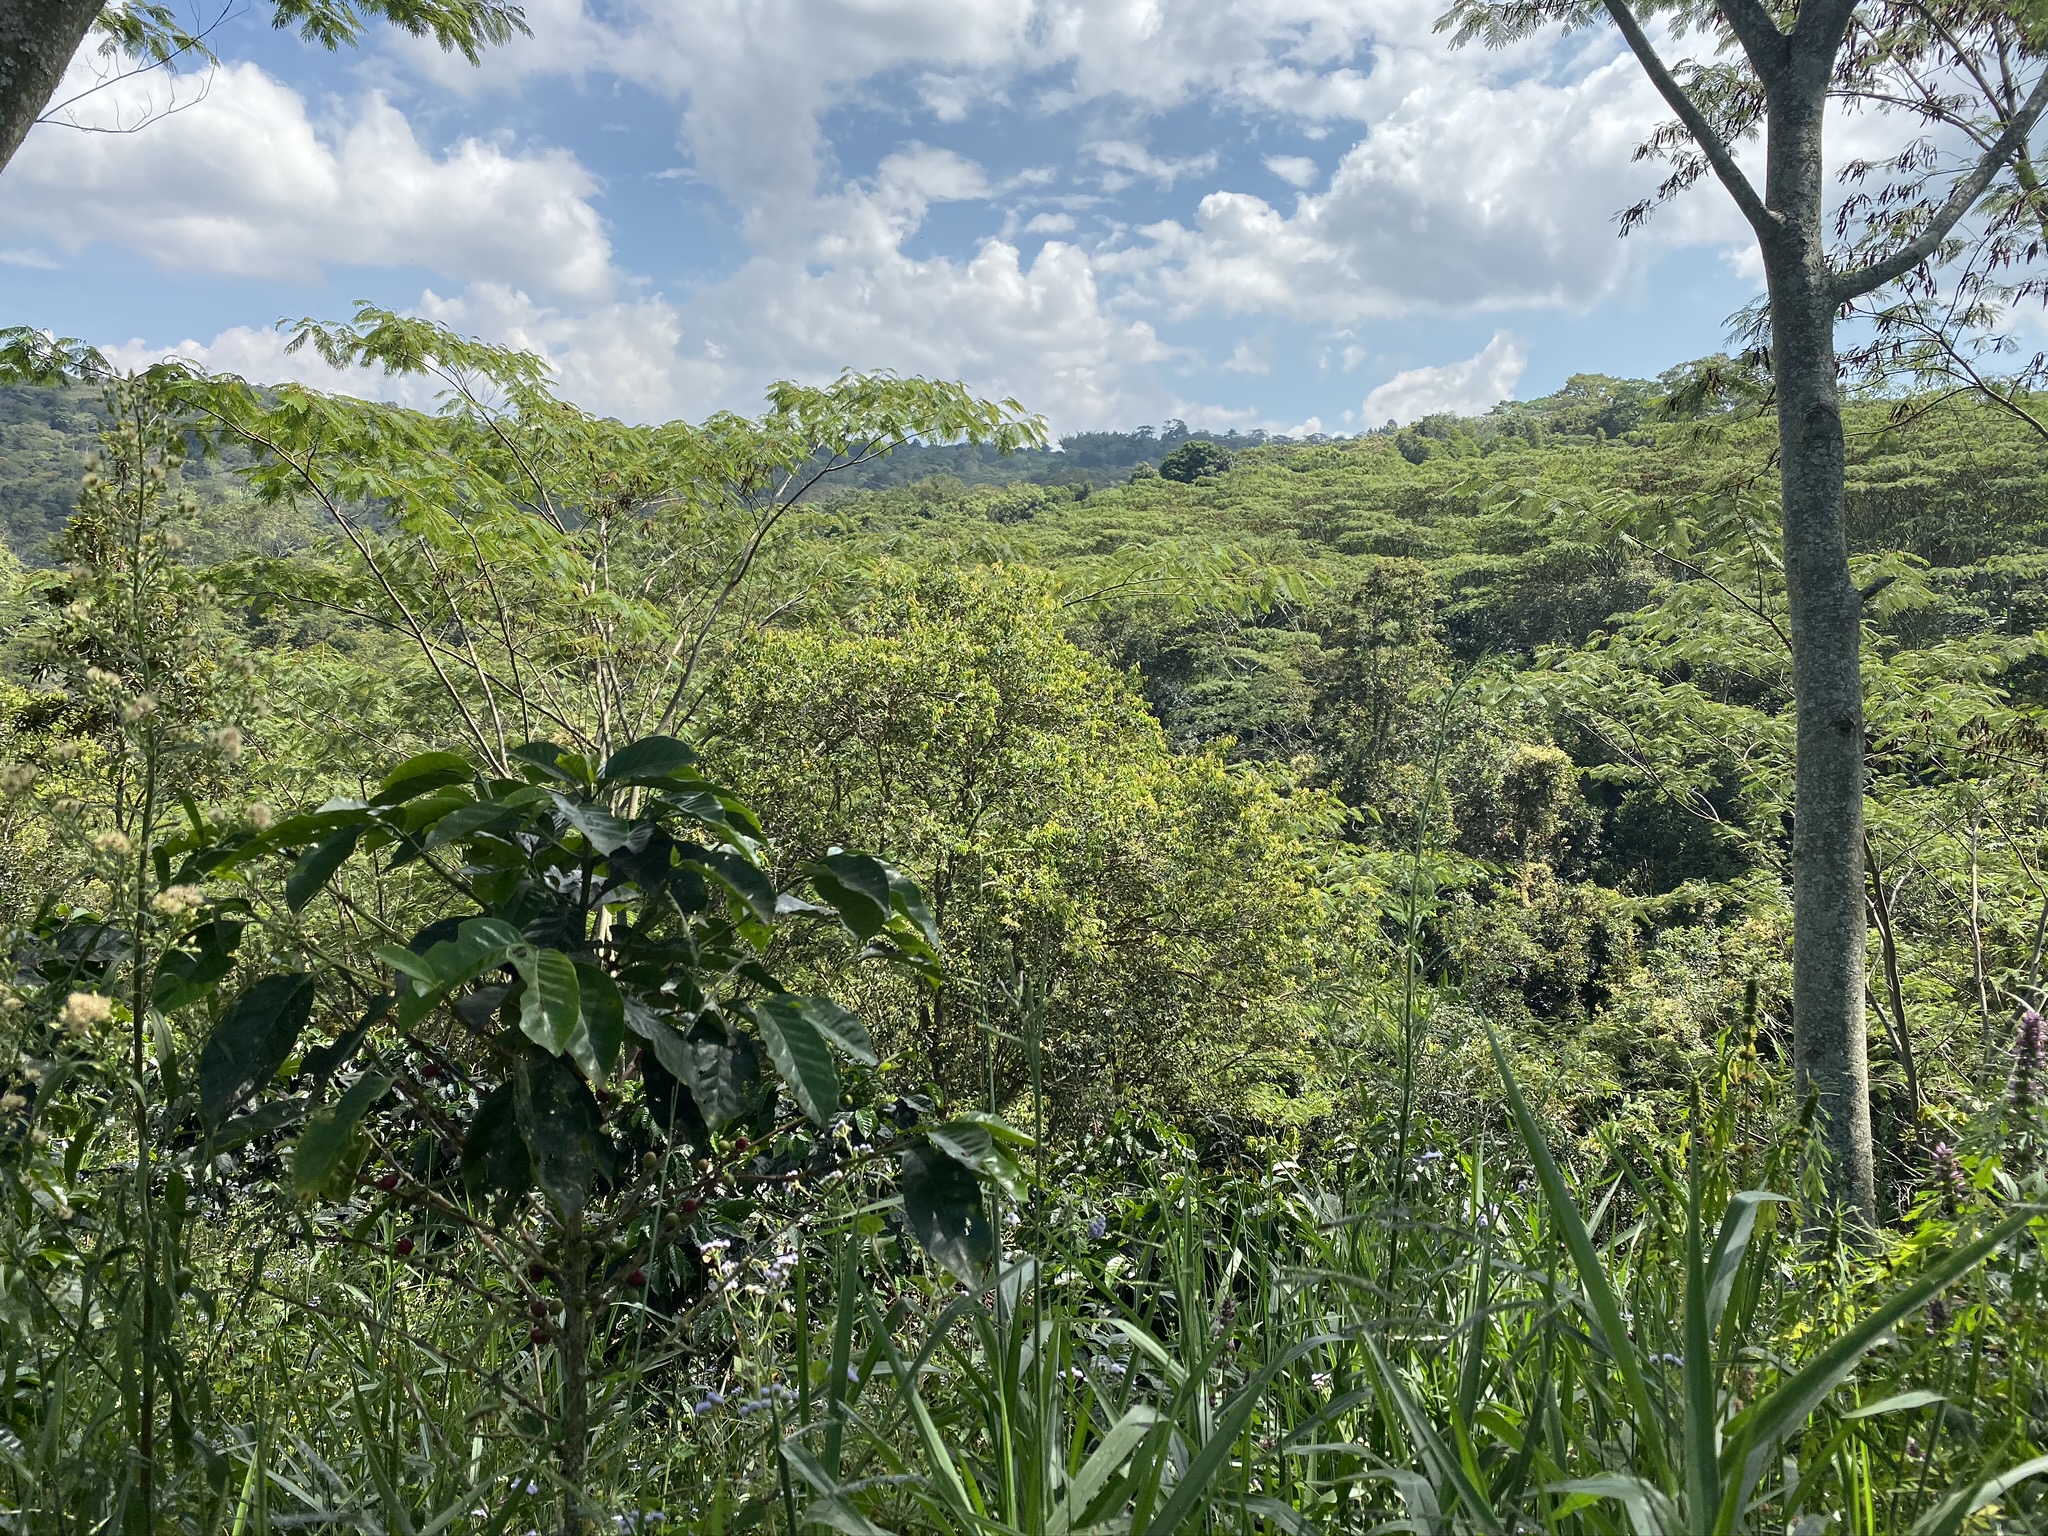 A scenic view of a lush, green forest under a partly cloudy sky. Tall trees with vibrant green foliage are visible in the foreground, while the dense forest stretches into the distance, creating a serene and natural landscape.